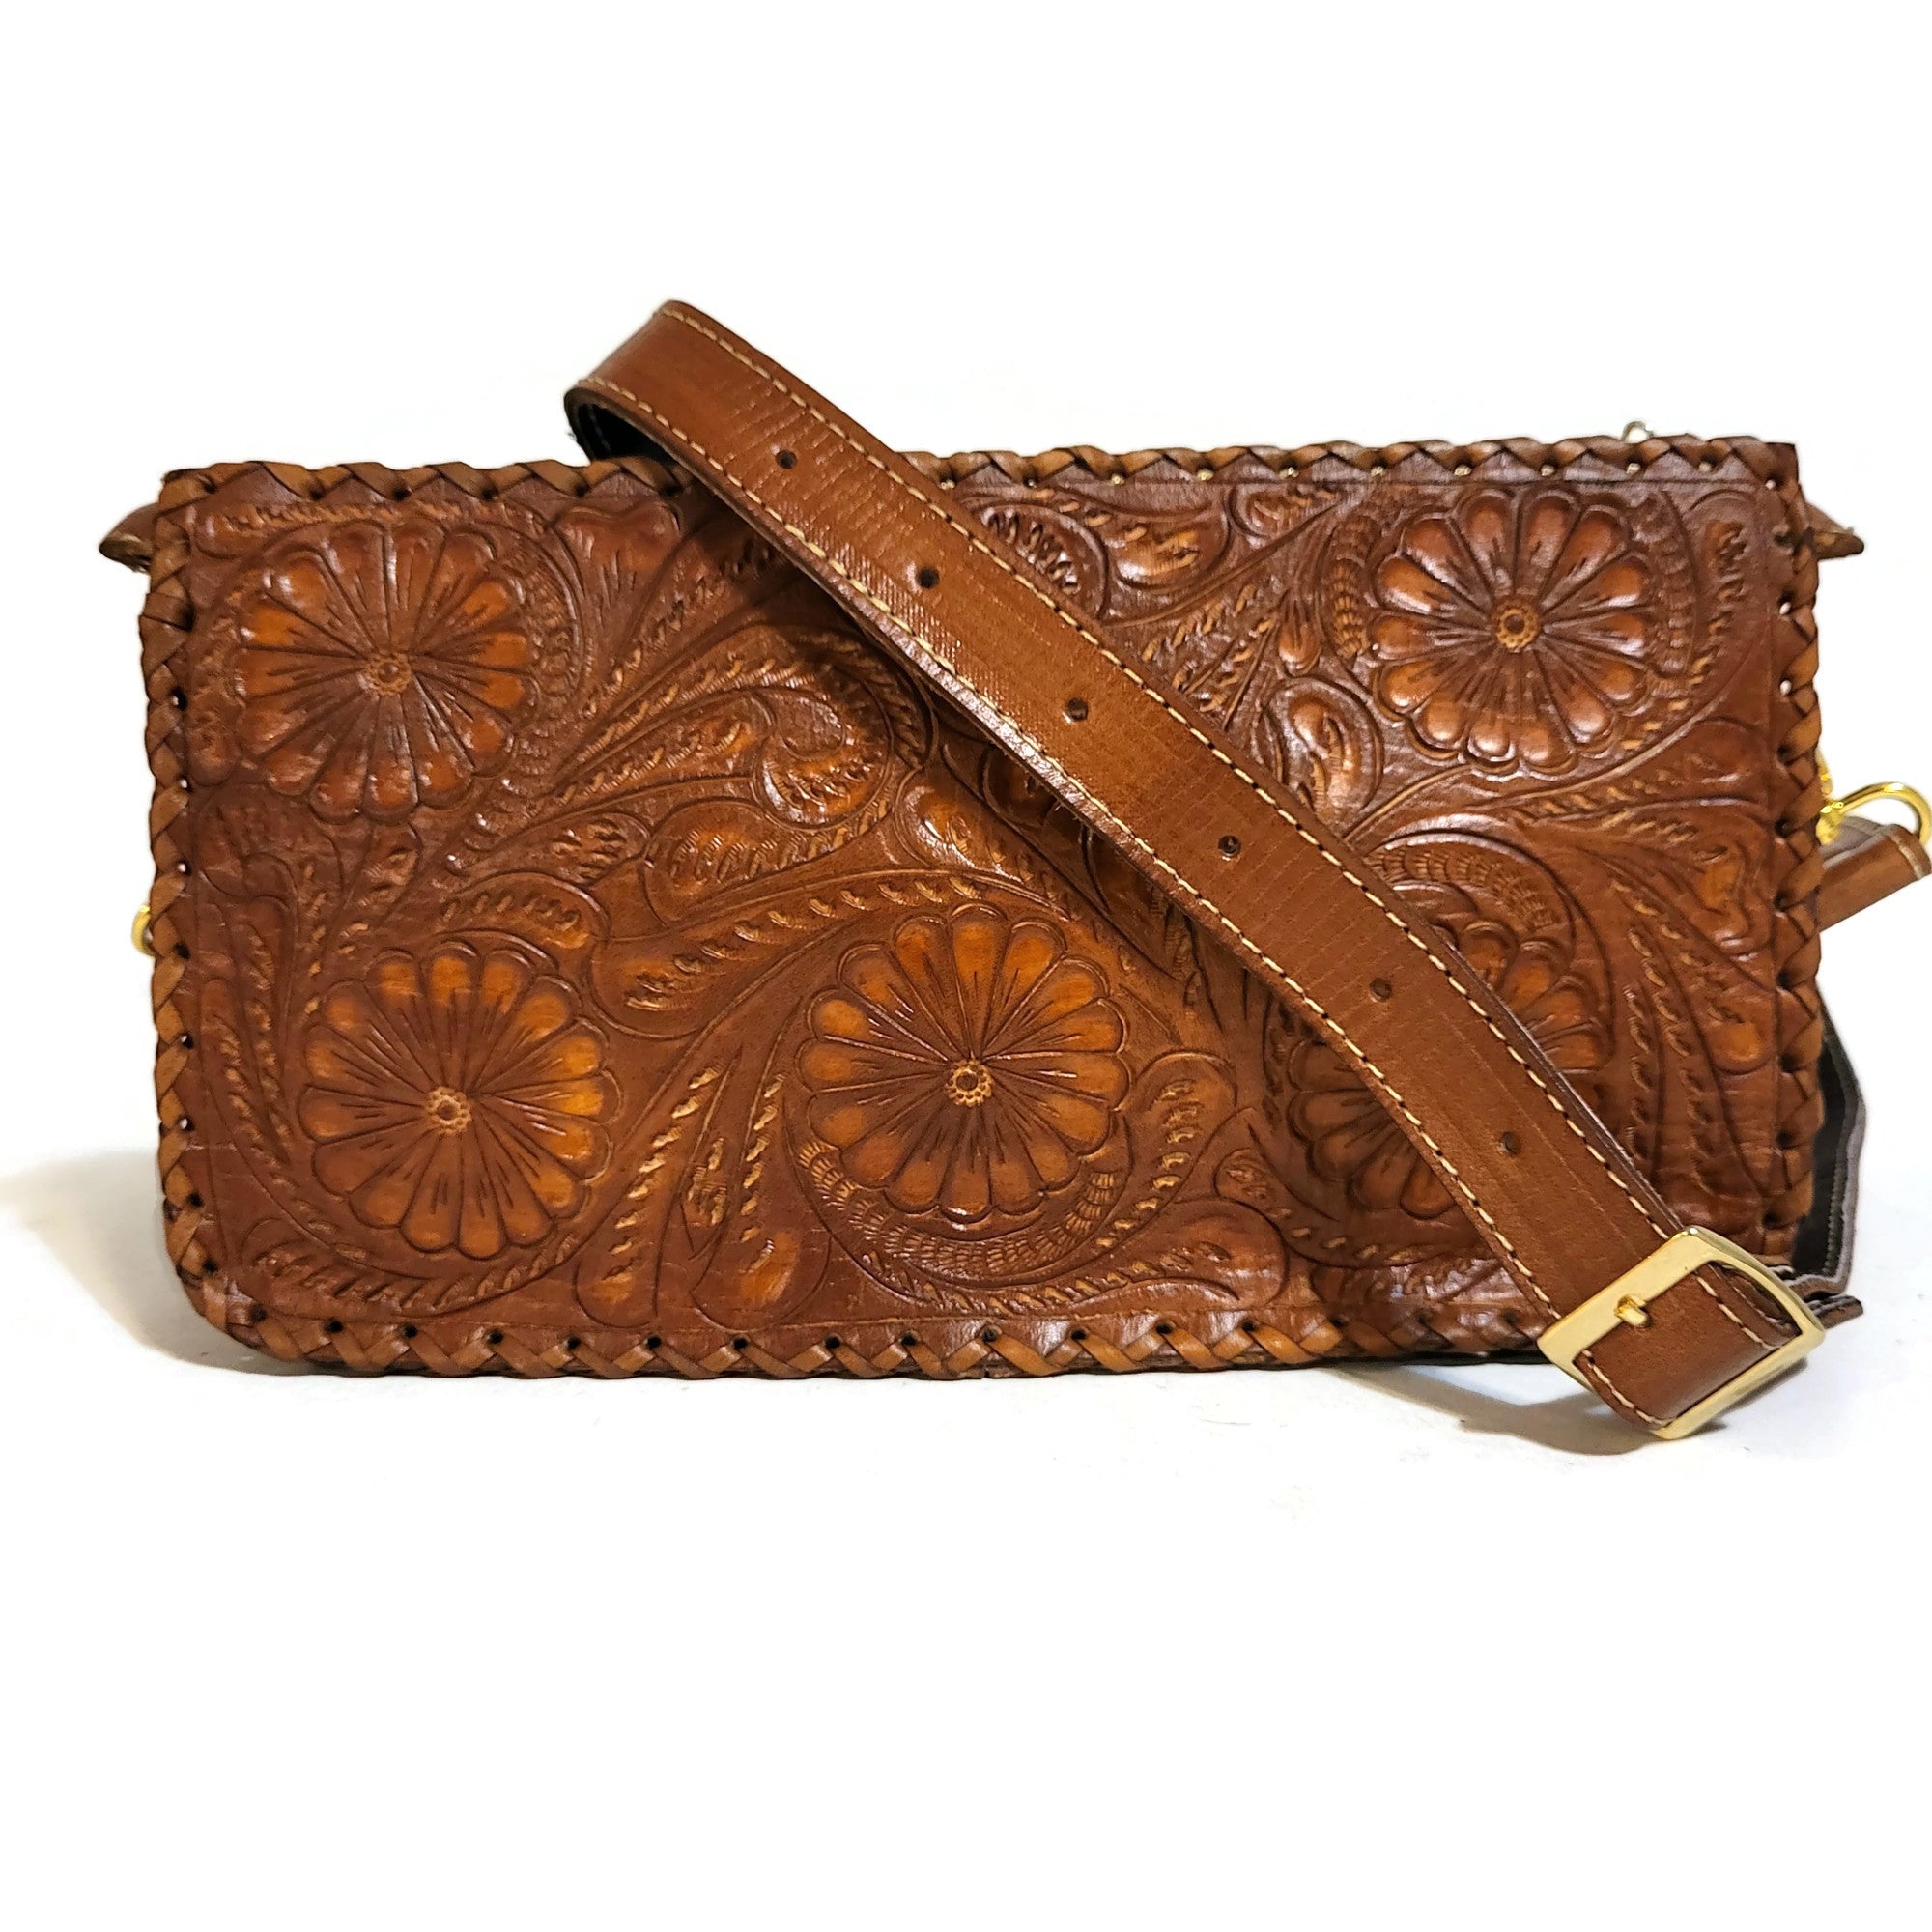 Hand tooled leather bag for women, small leather  shoulder bag, leather womens bag